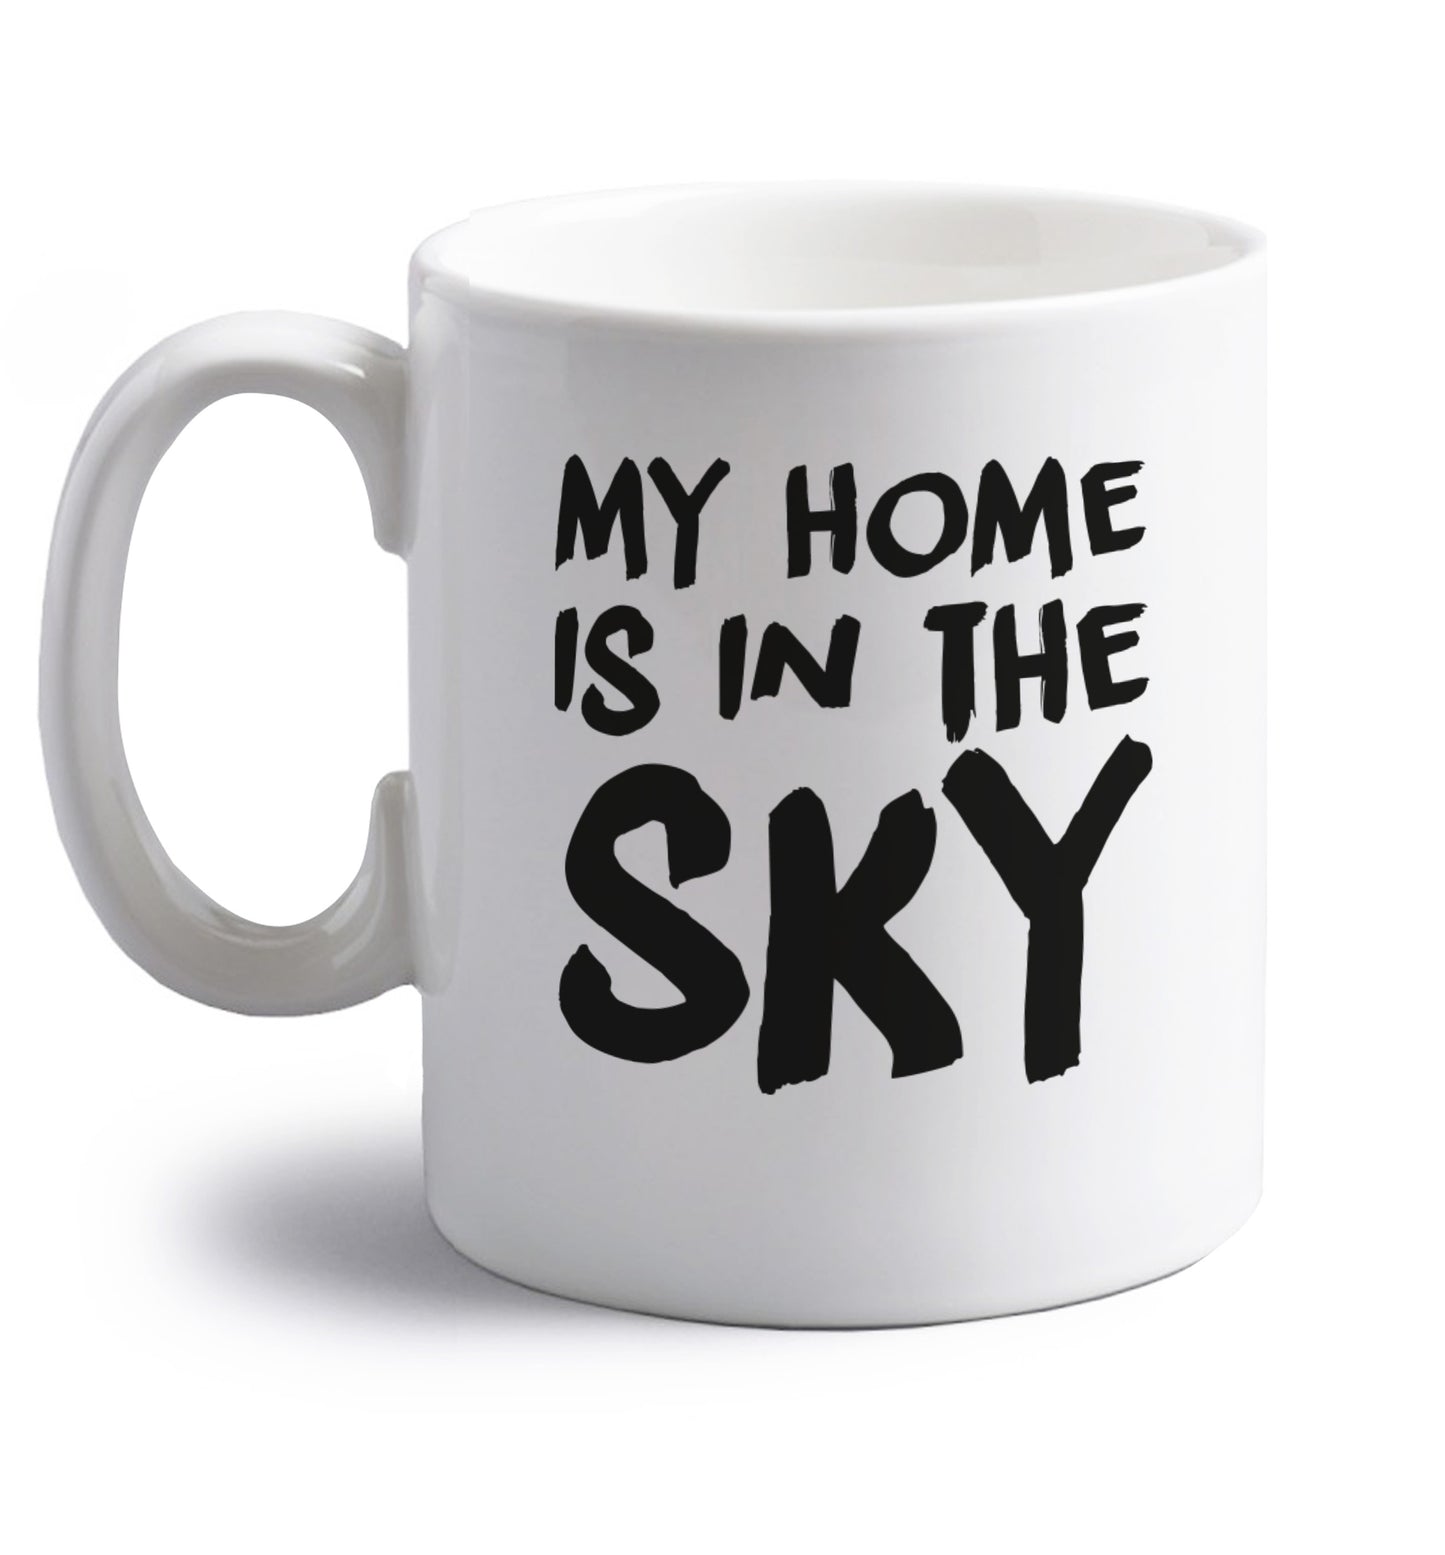 My home is in the sky right handed white ceramic mug 